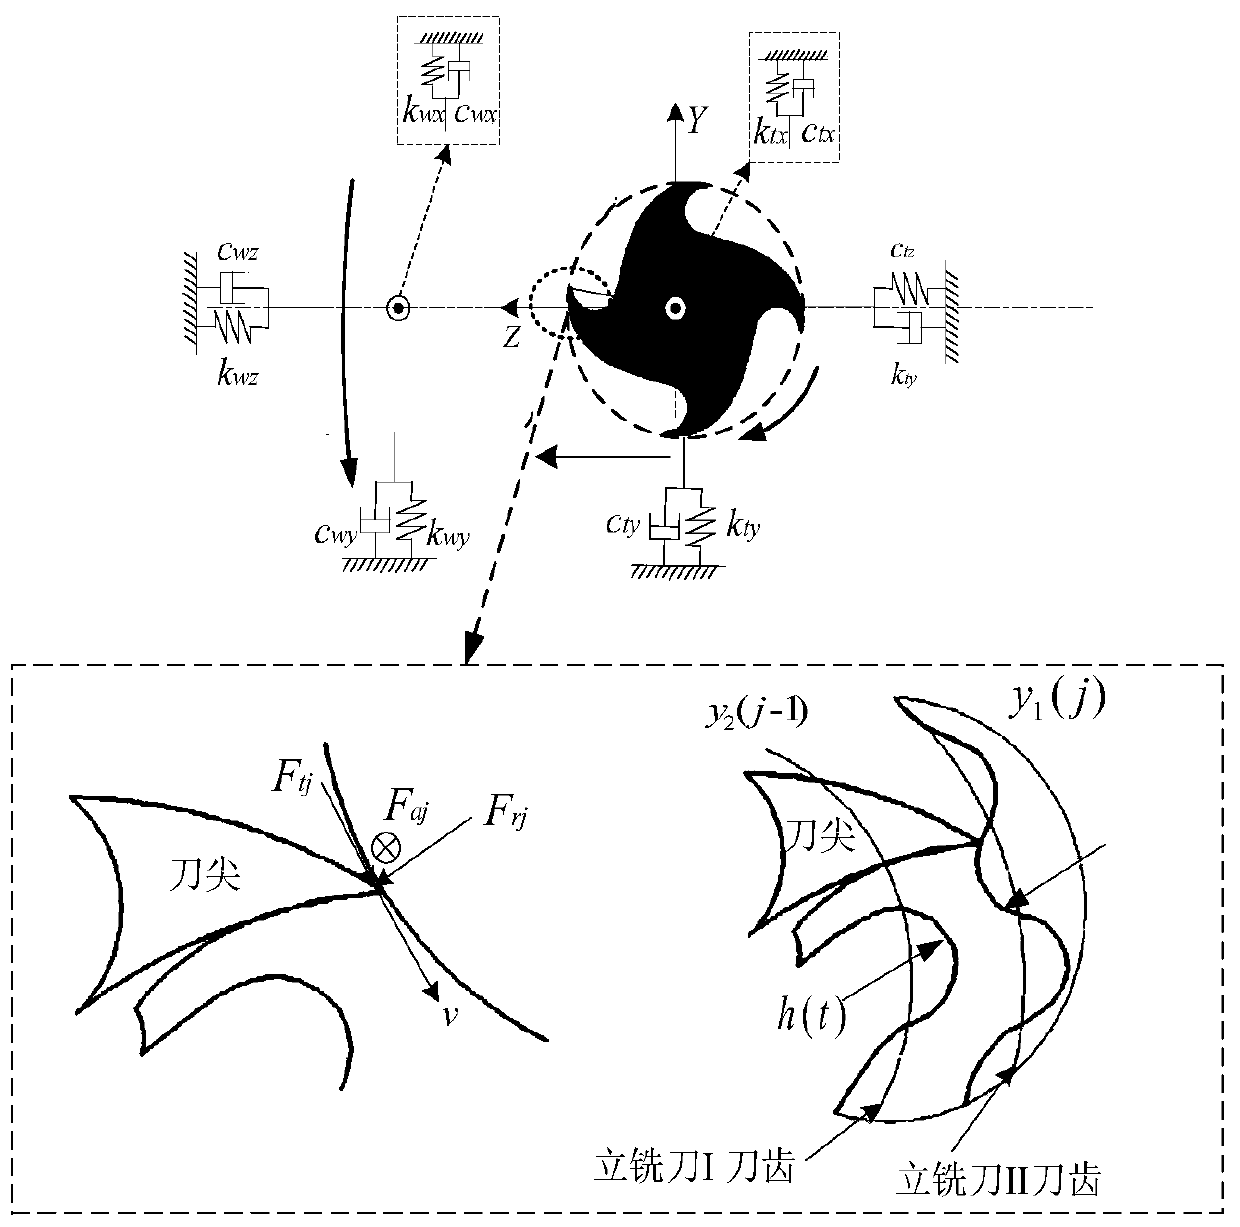 Parallel synchronous orthogonal turn-milling flutter stability lobe graph prediction method